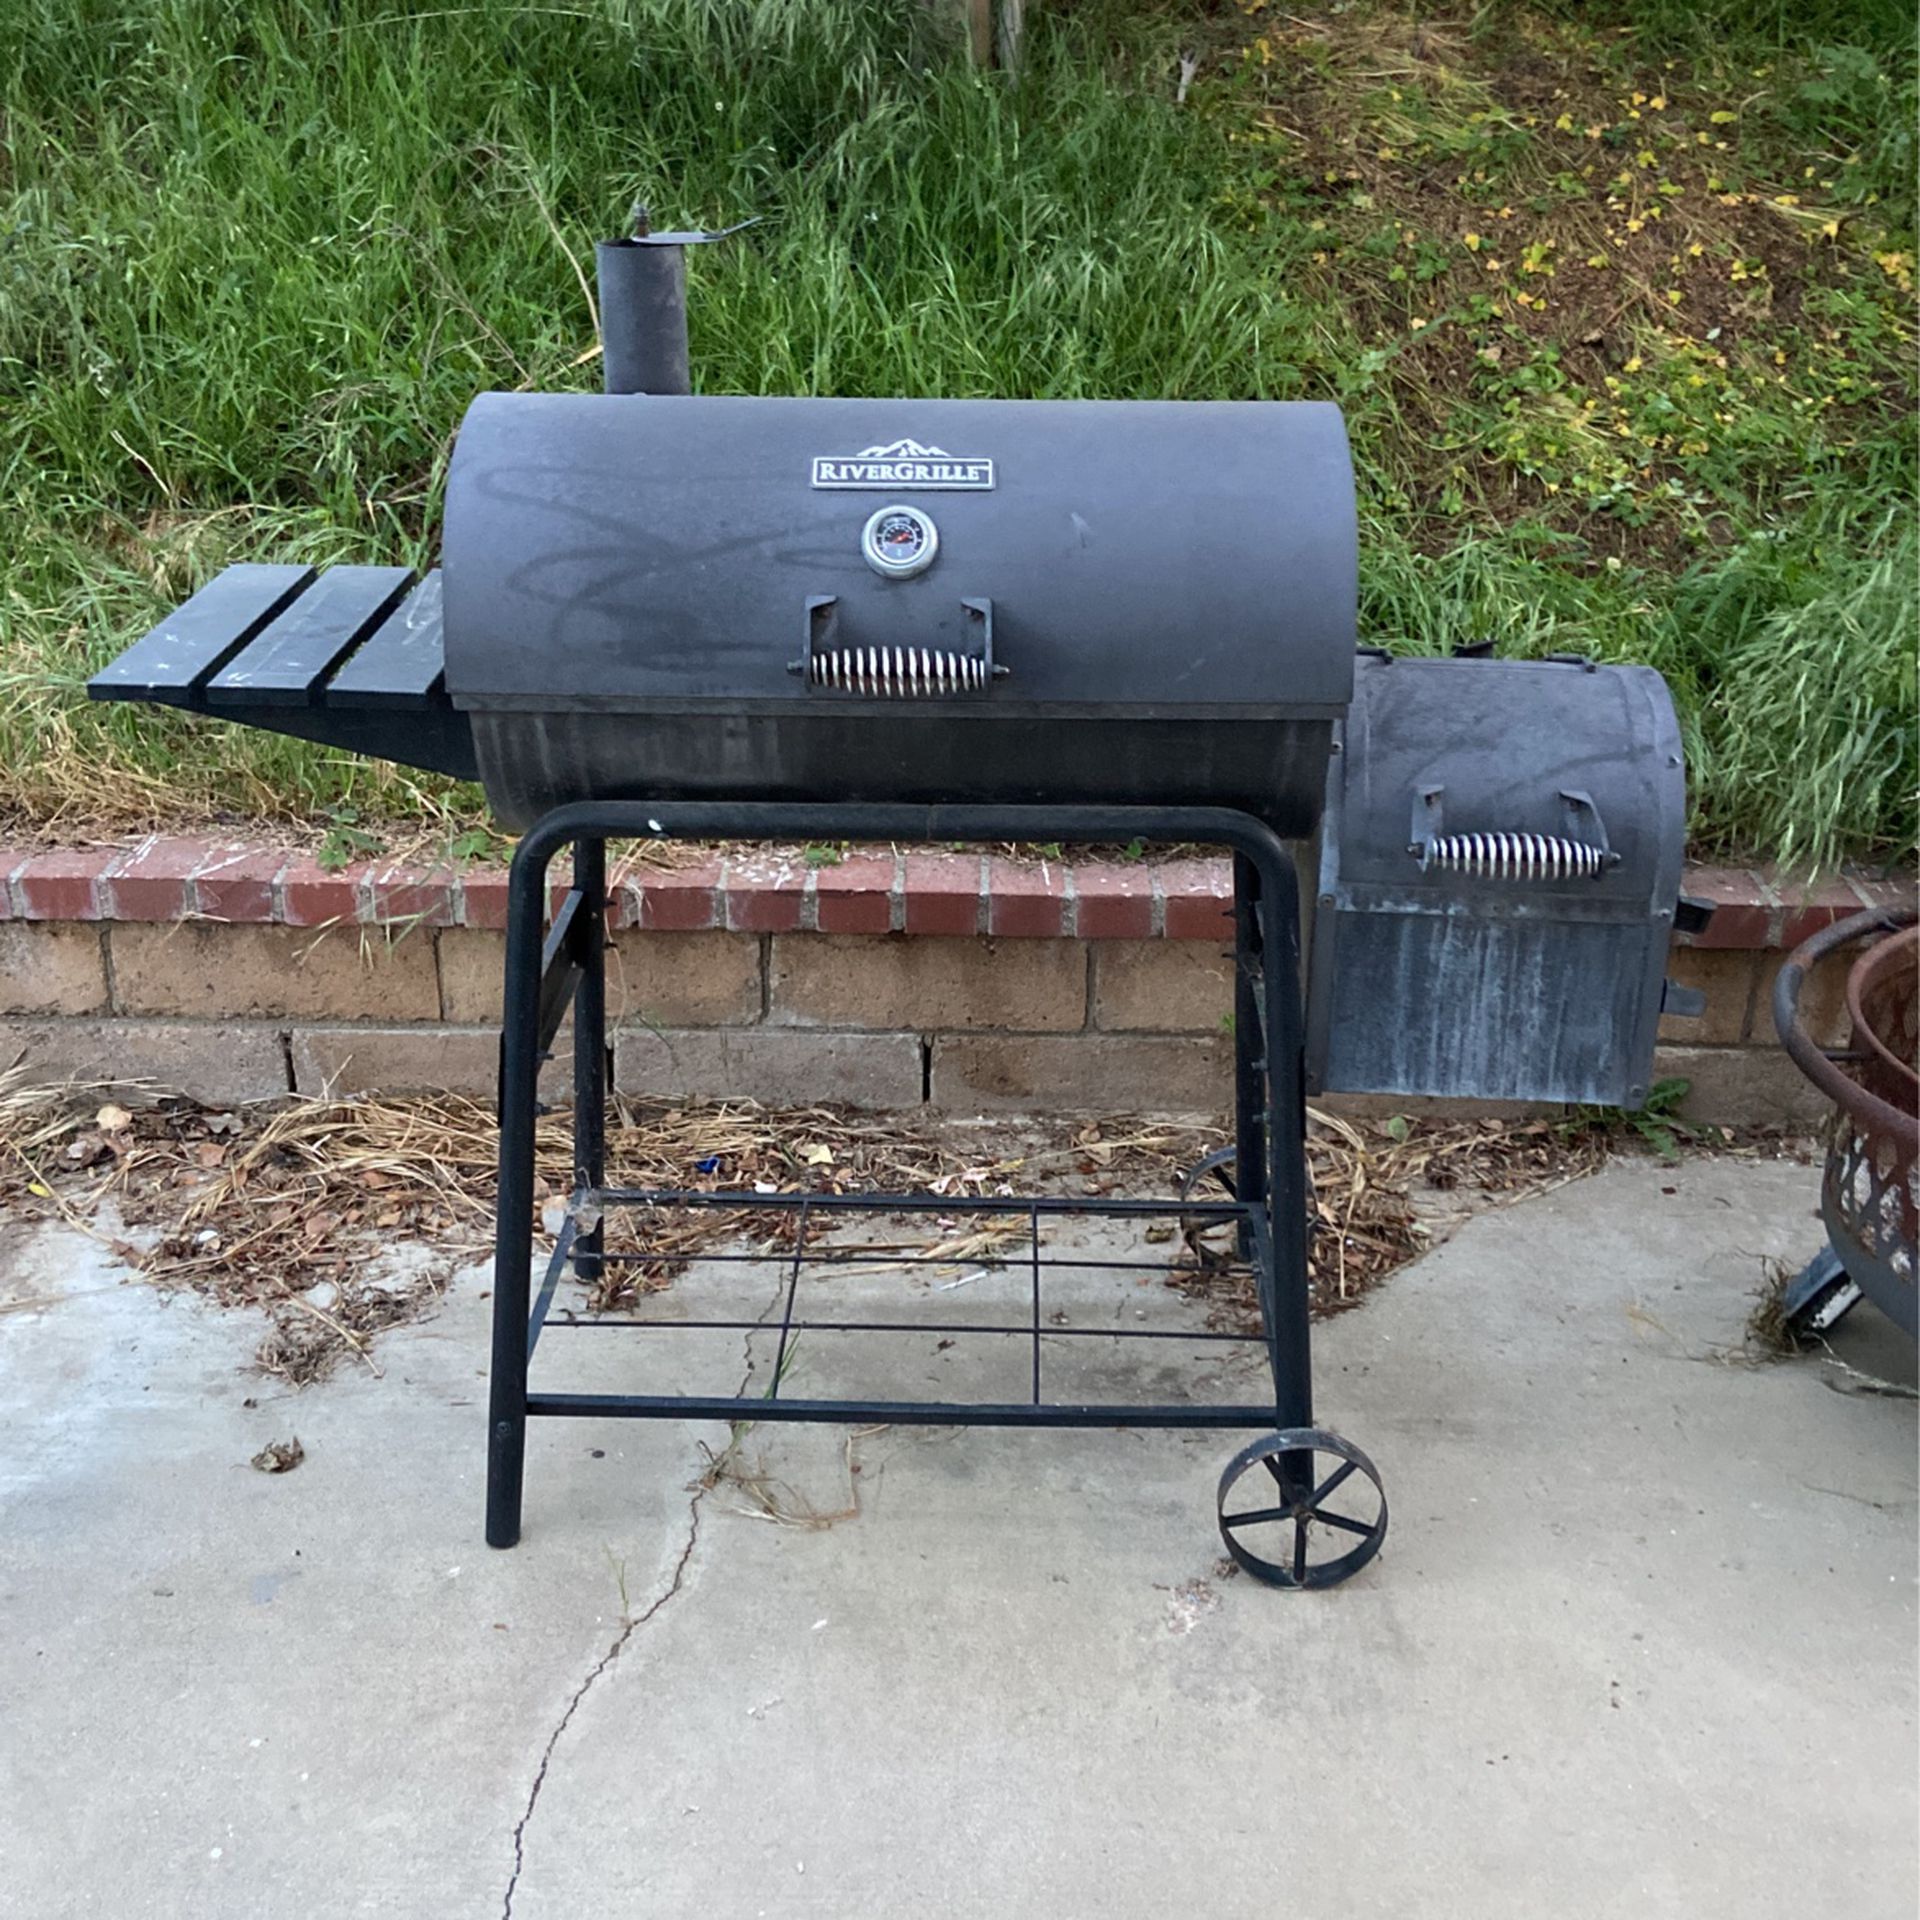 Rivergrille 29” Cattleman Outdoor Barbecue Grill With Smoker 